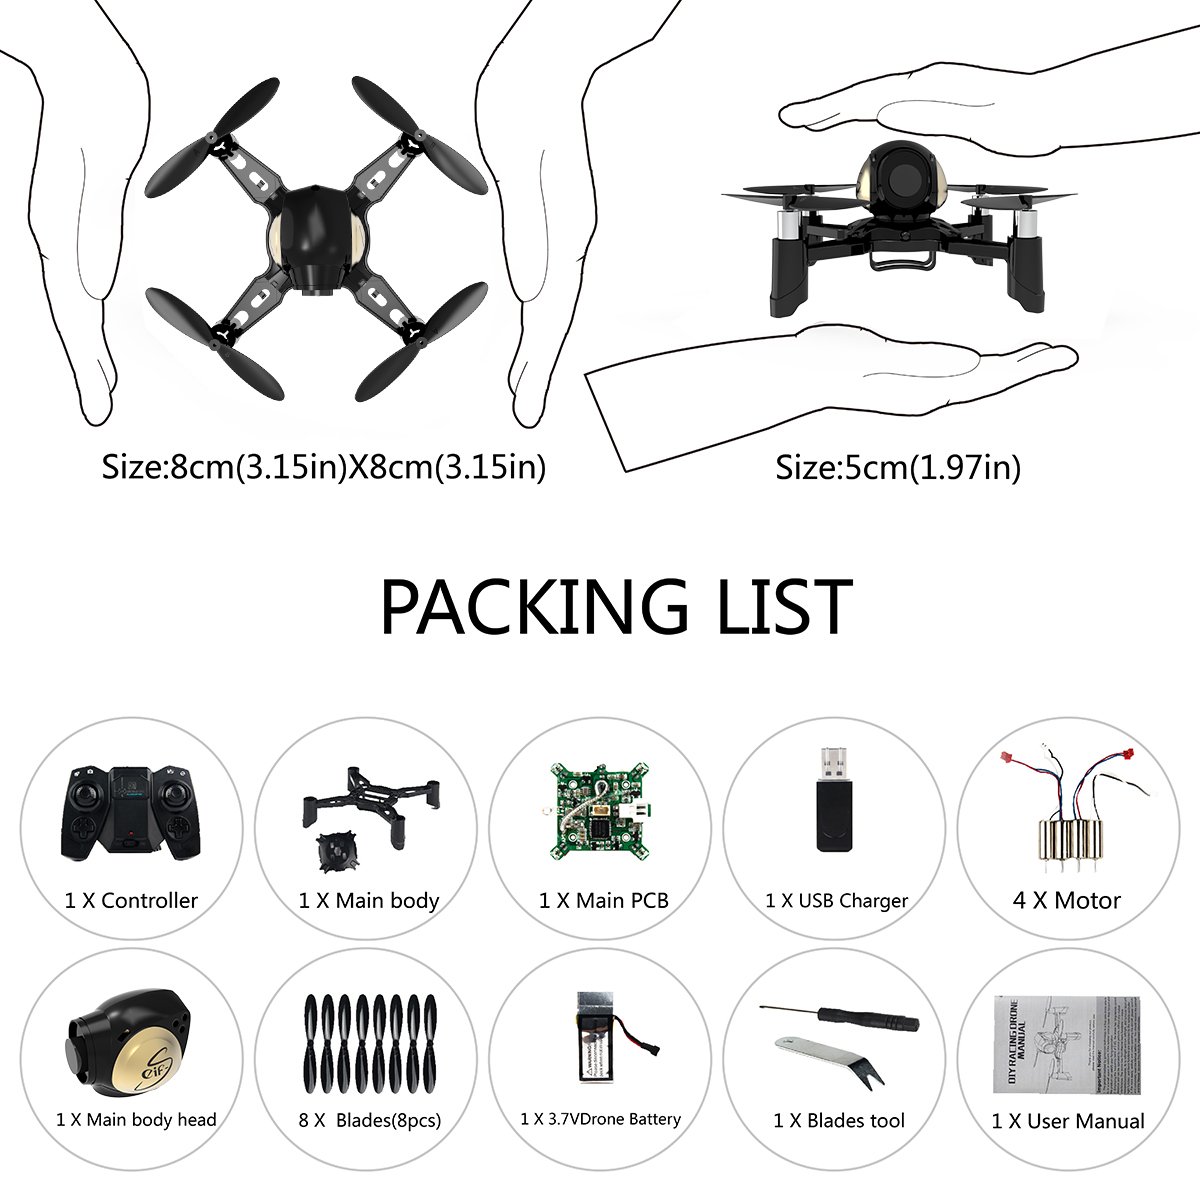 REMOKING R605 RC DIY Drone Toys Mini Racing Quadcopter Headless Mode 2.4GHz 360°flip 4 Channels Altitude Hold Indoor and Outdoor Game Educational Building Toy Science Kit for Kids and Adults